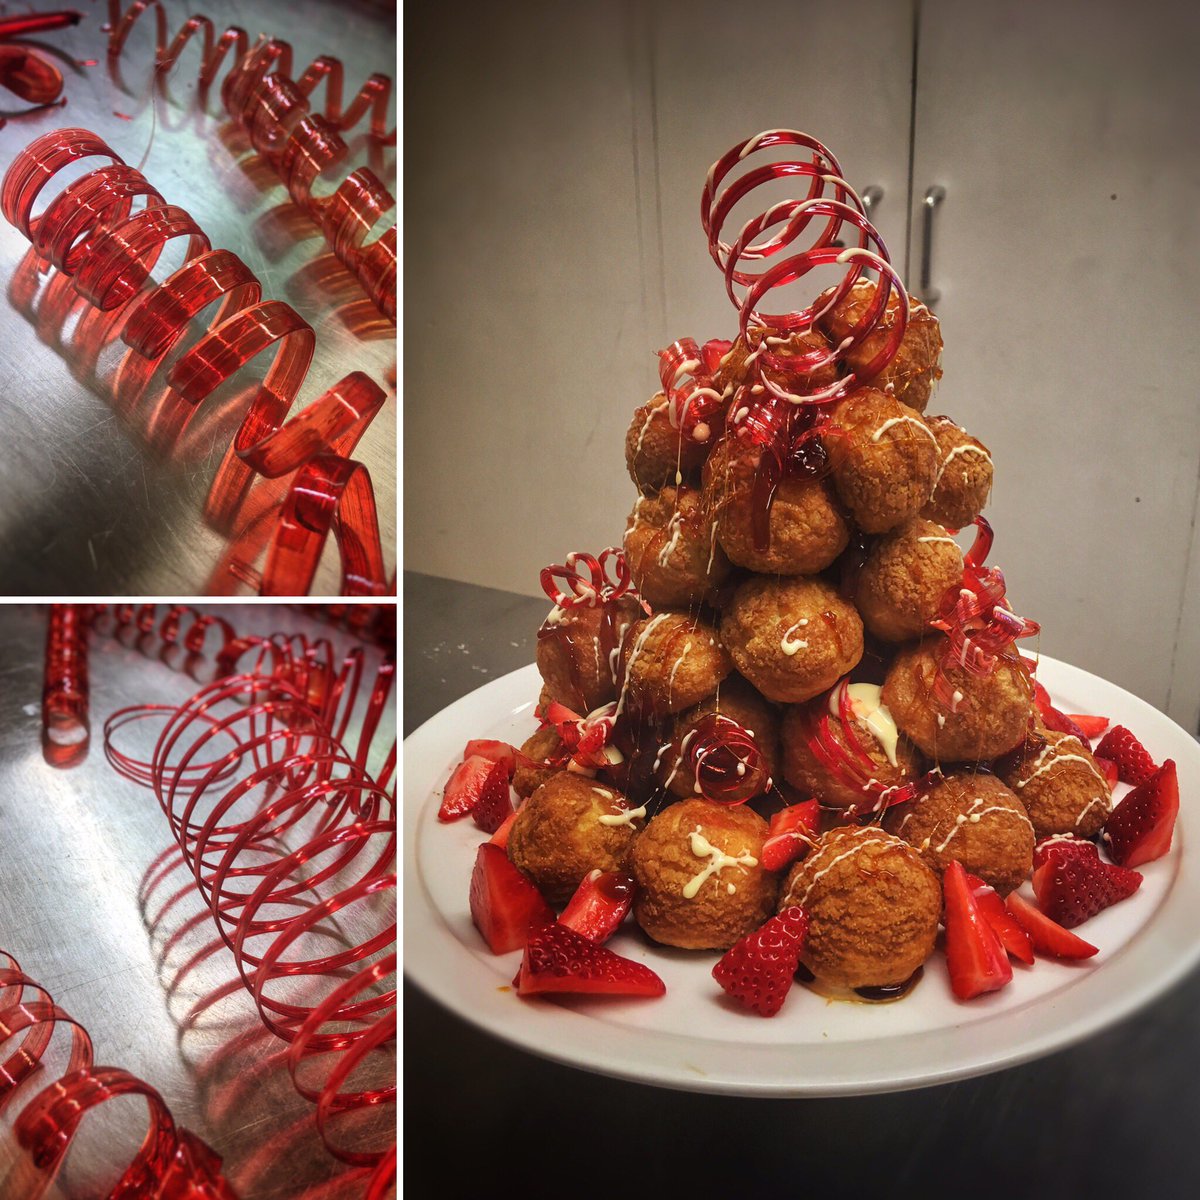 Pulling sugar is one of my favourite things 🍓strawberry and white chocolate choux au craquelin tower, for one of our regular guest's celebration centre piece #calcot #theconservatory #croquembouche #pulledsugar #sugarwork #sweetthings #yummy #baking